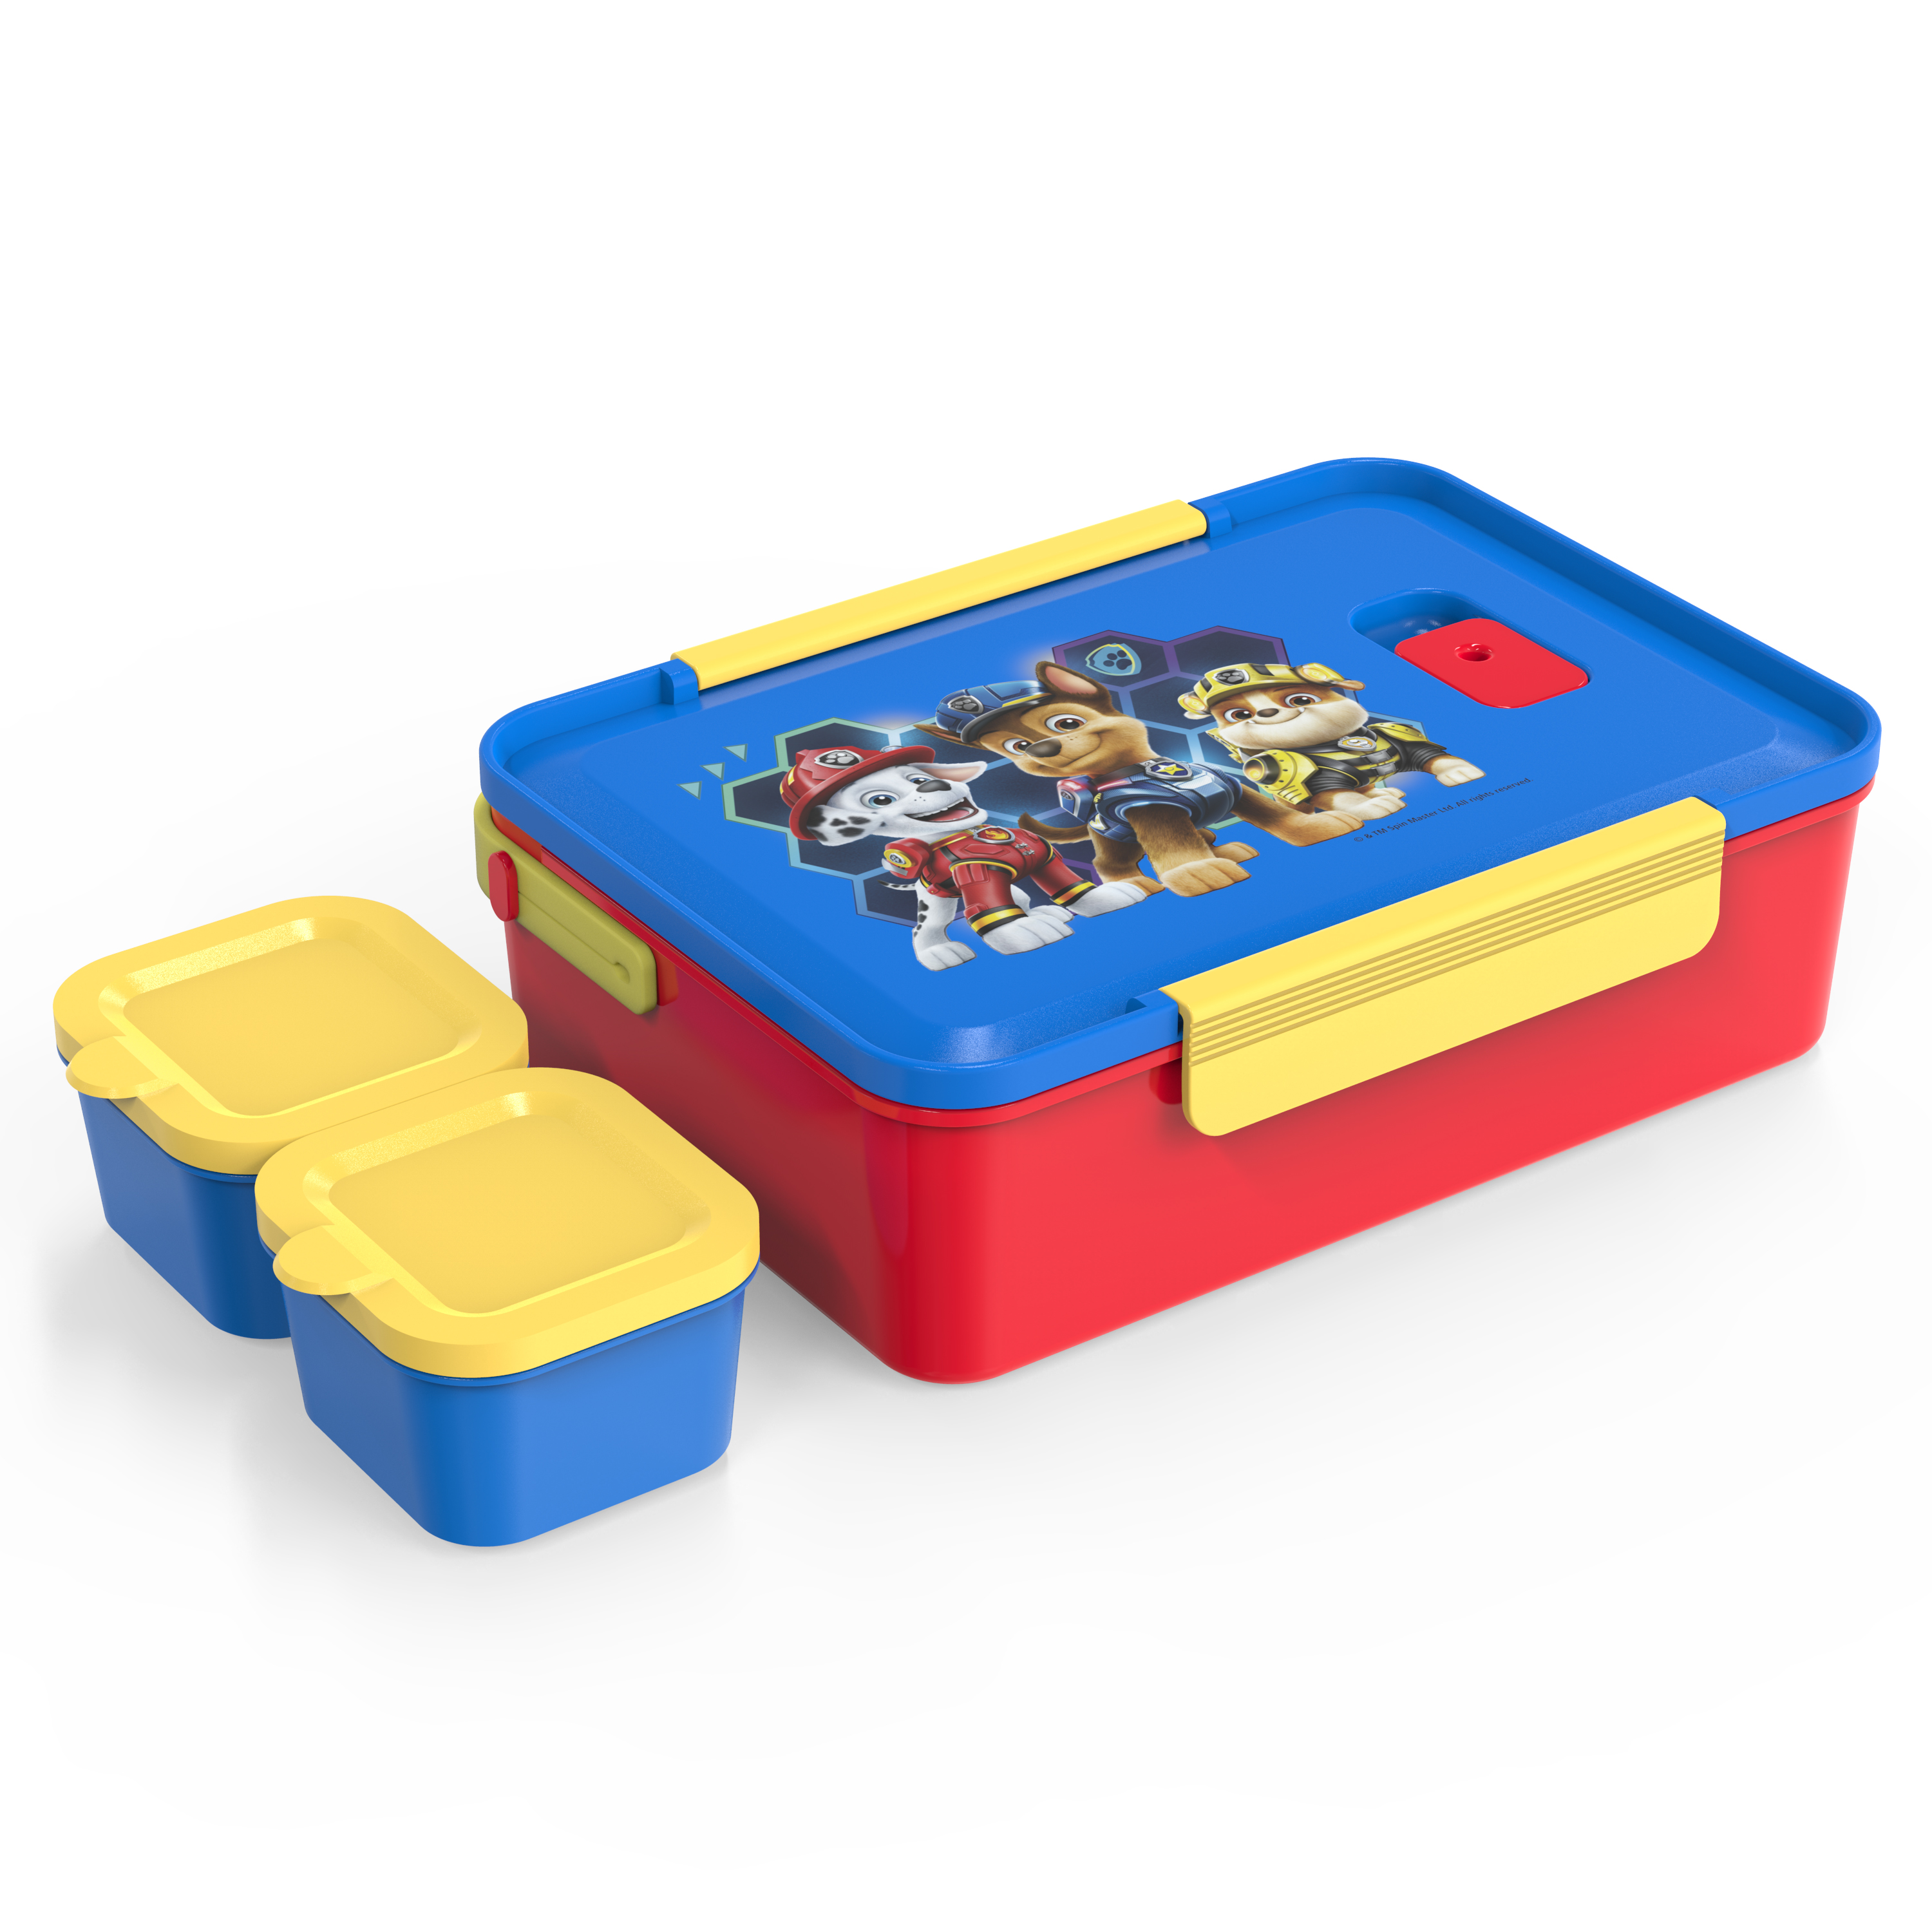 Paw Patrol Movie Reusable Divided Bento Box, Rubble, Marshall and Chase, 3-piece set slideshow image 2